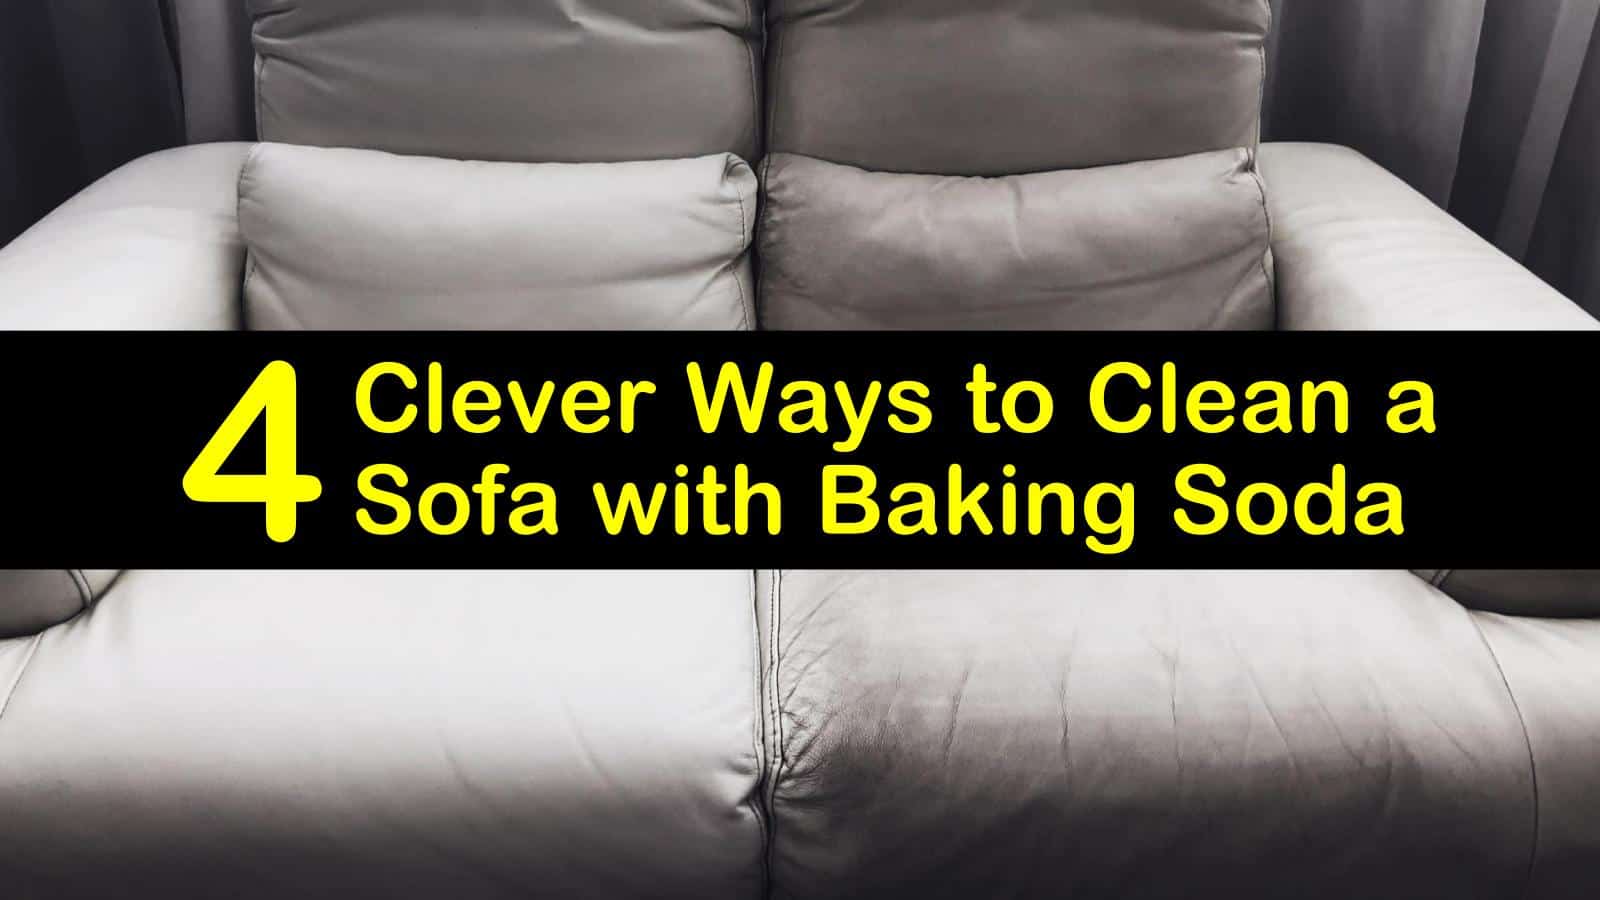 Clean A Sofa With Baking Soda